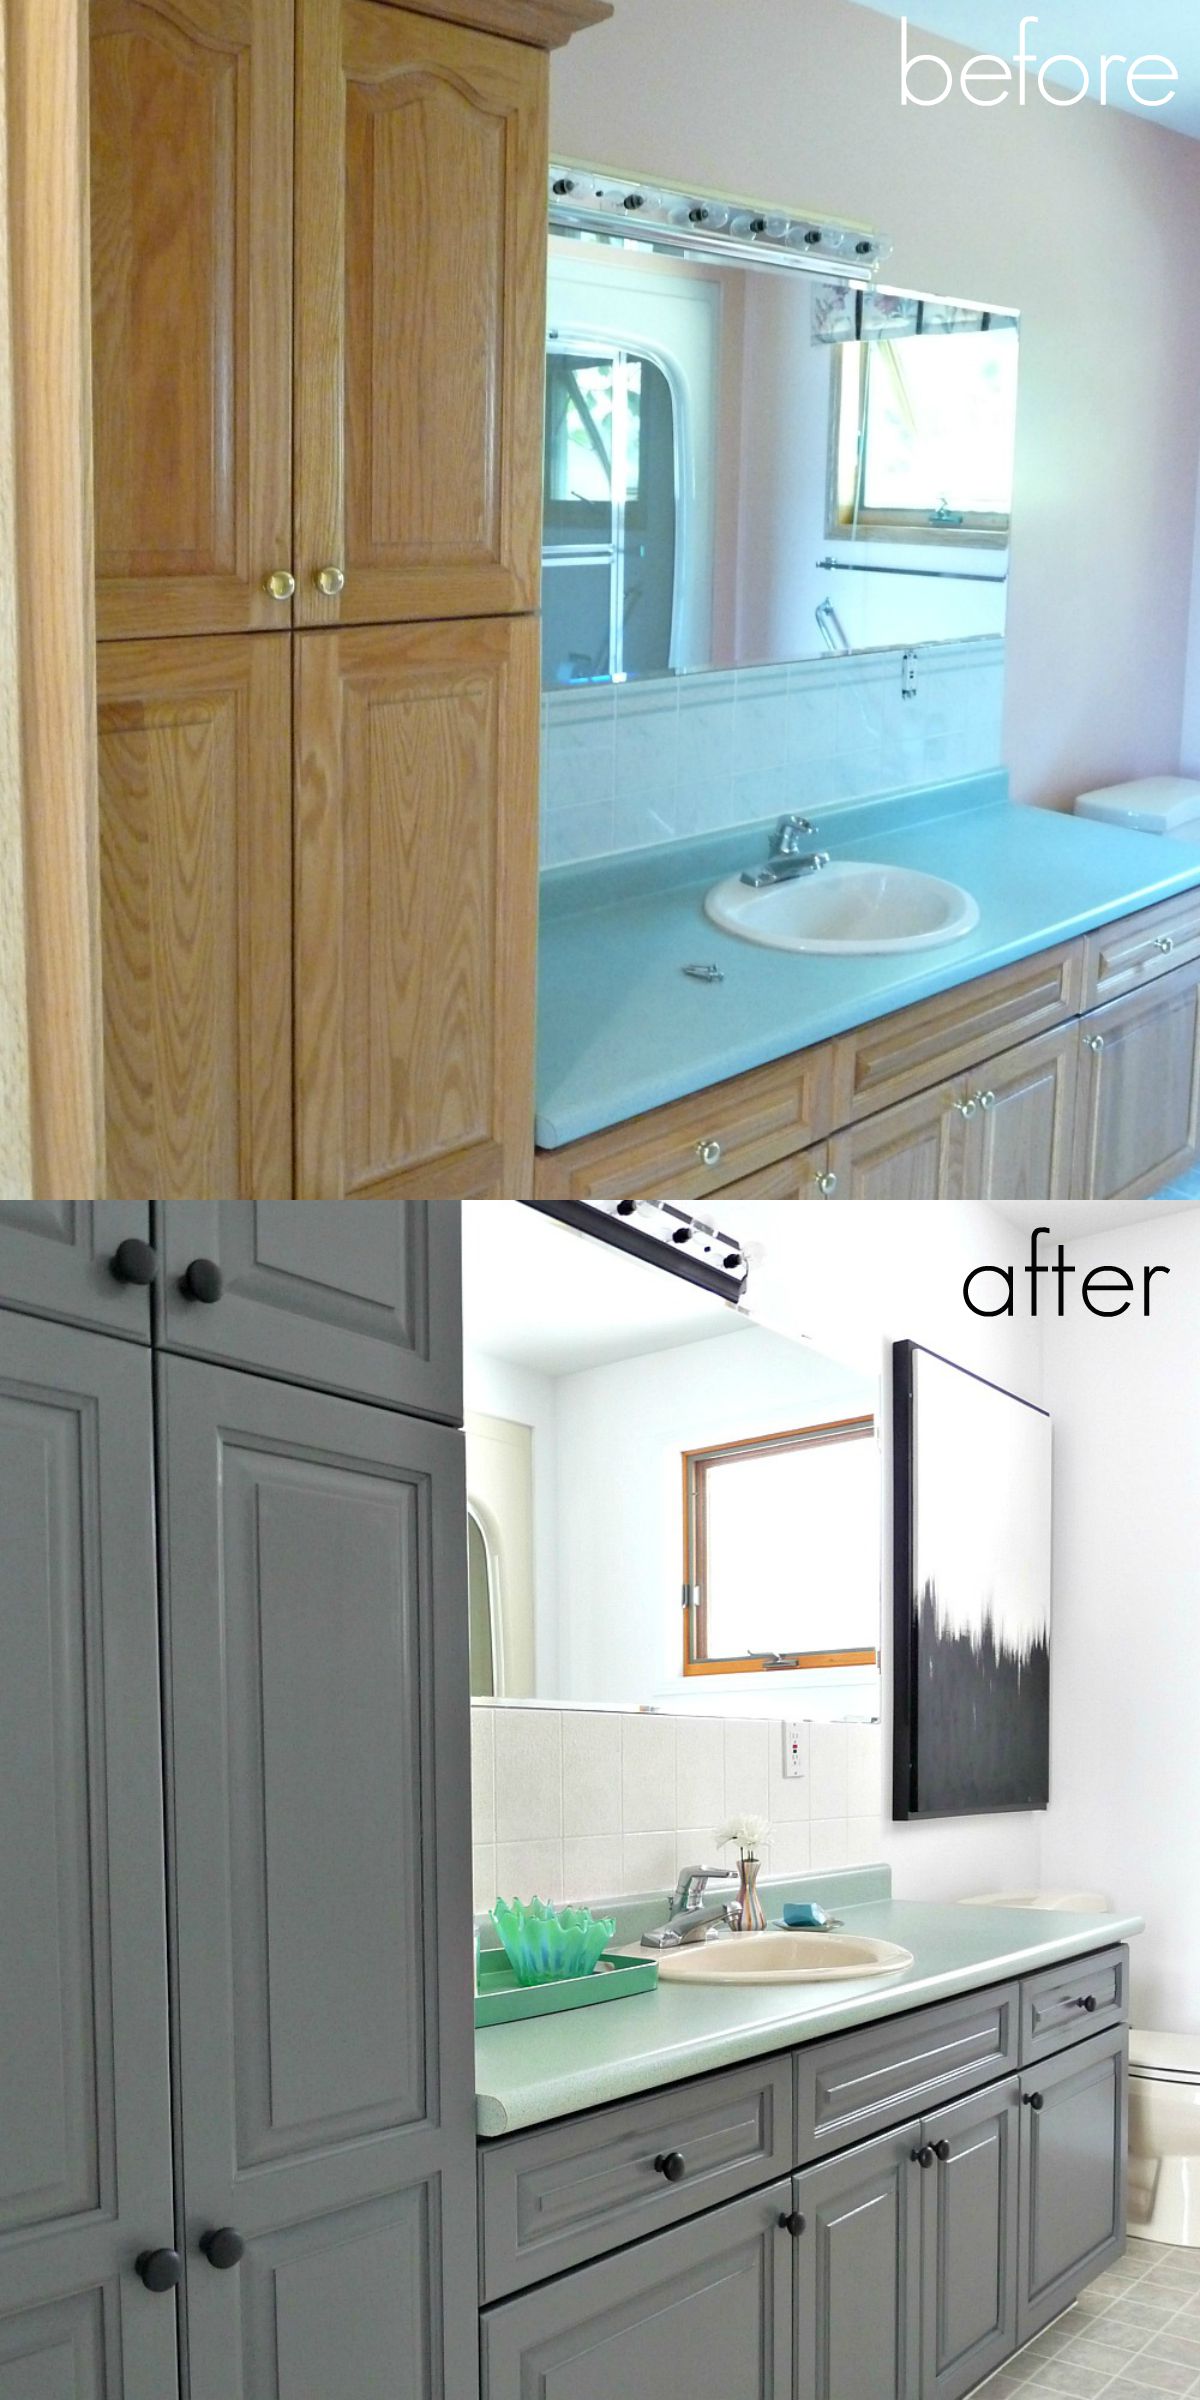 How To Refinish Bathroom Cabinets Easily Rust Oleum Cabinet